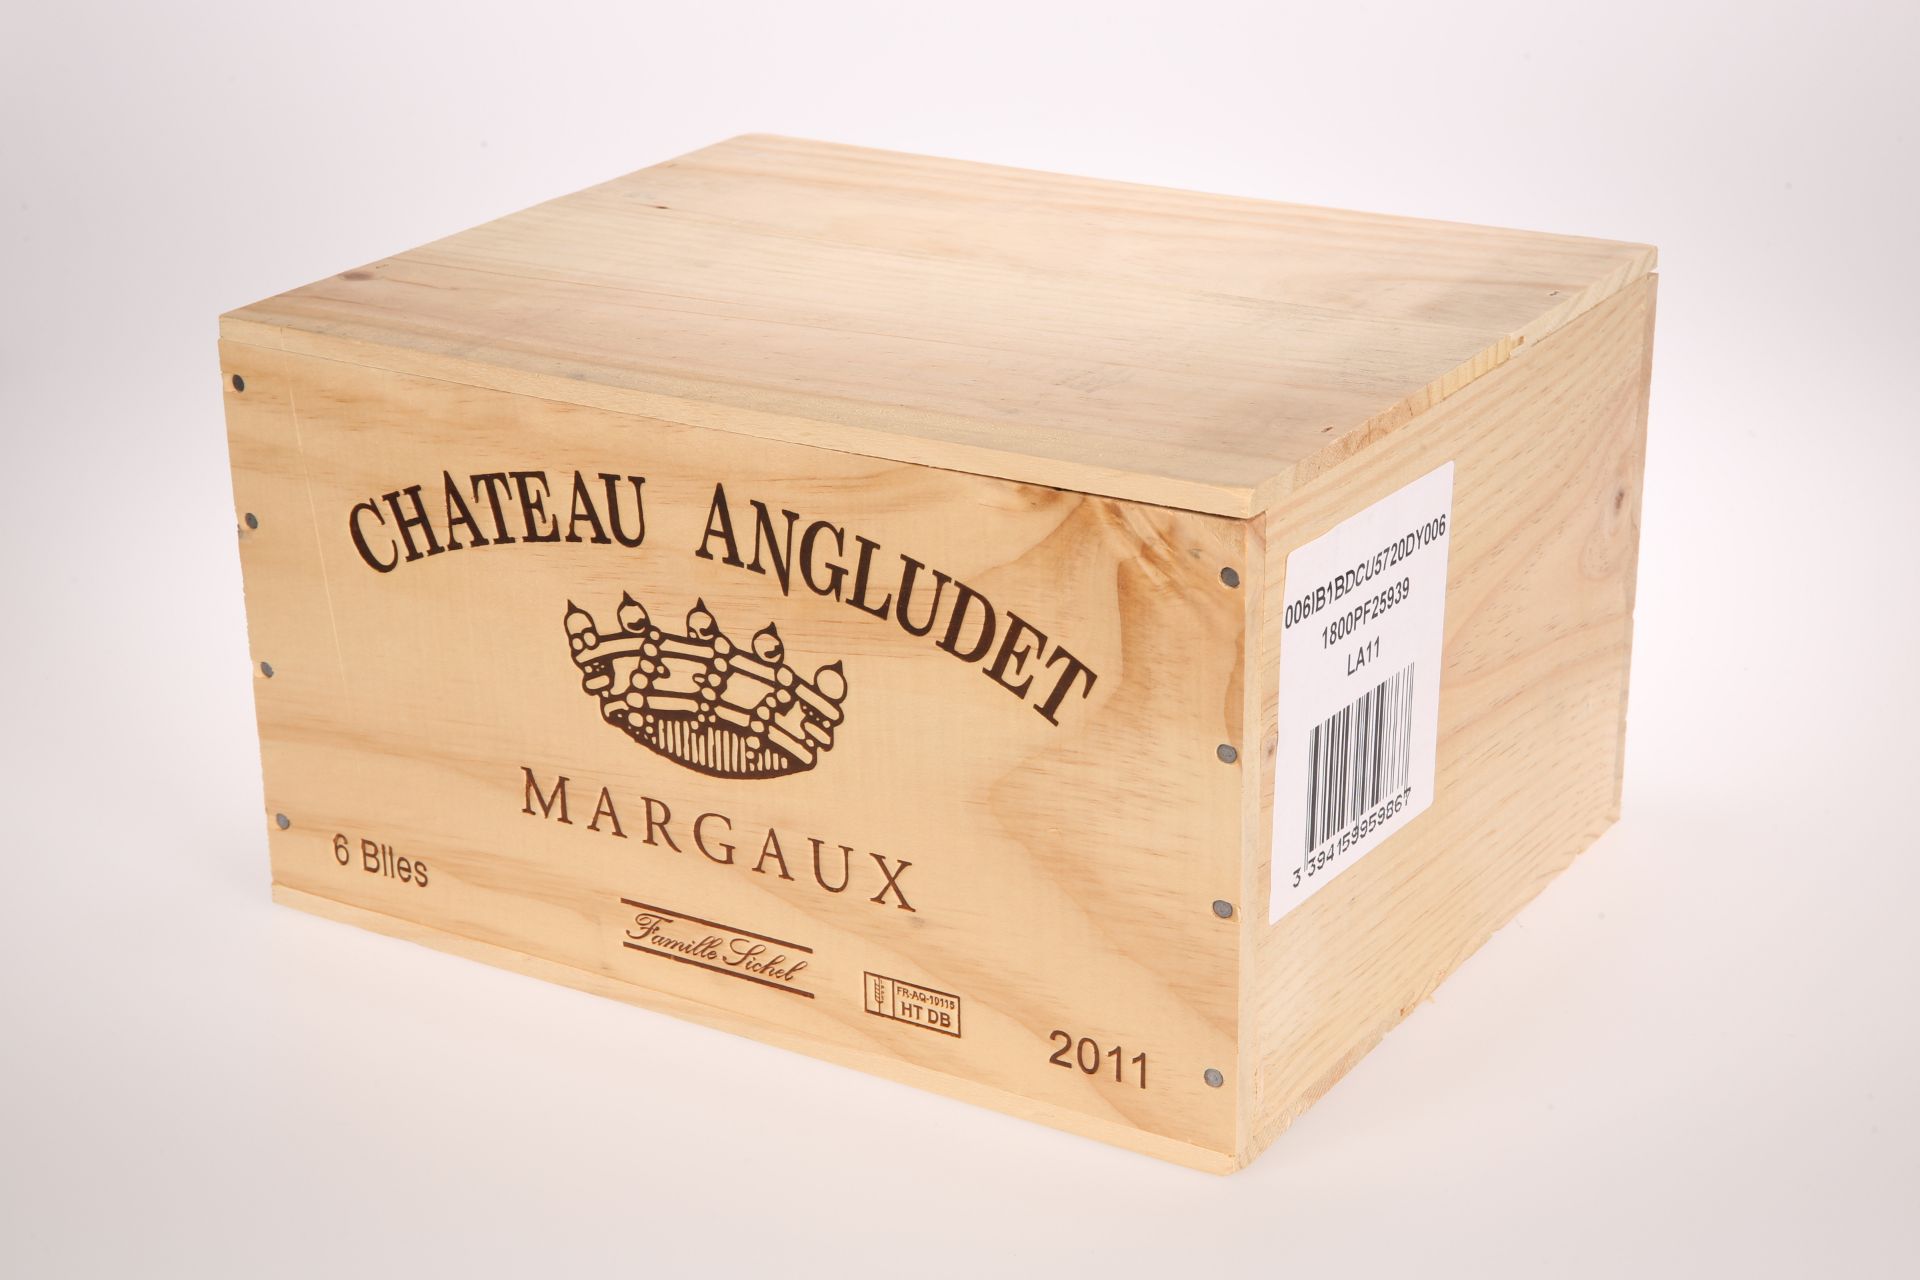 12 BOTTLES CHATEAU D'ANGLUDET CRU BOURGEOIS SUPERIEUR MARGAUX 2011